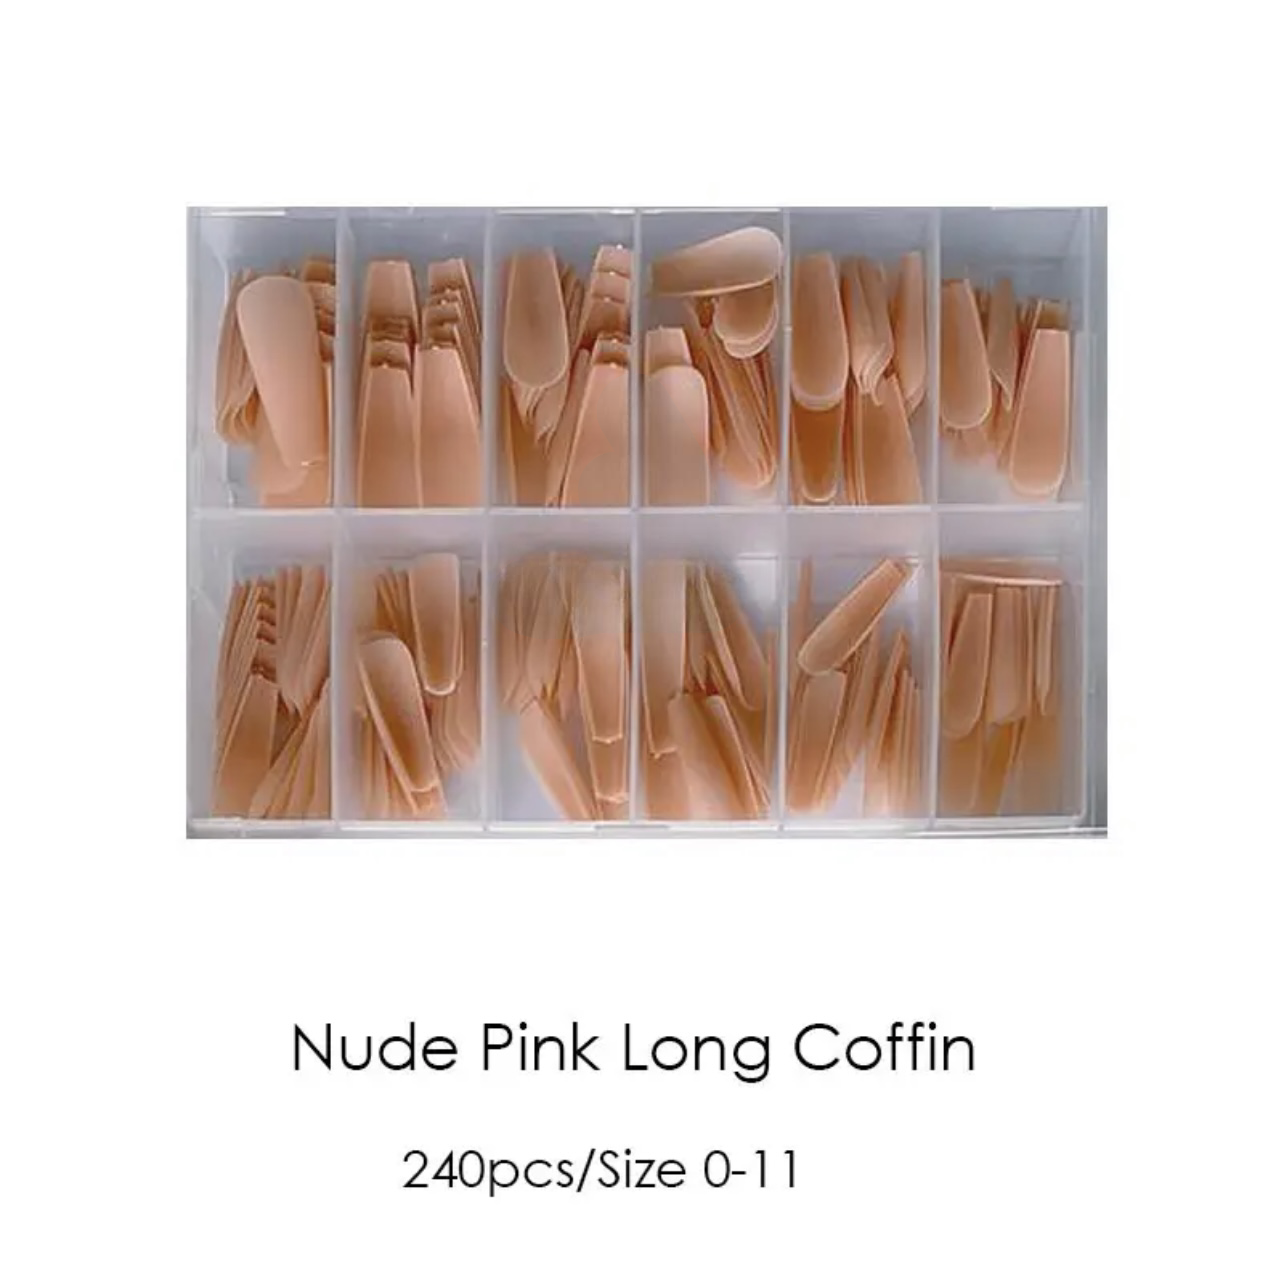 NUDE PINK LONG COFFIN